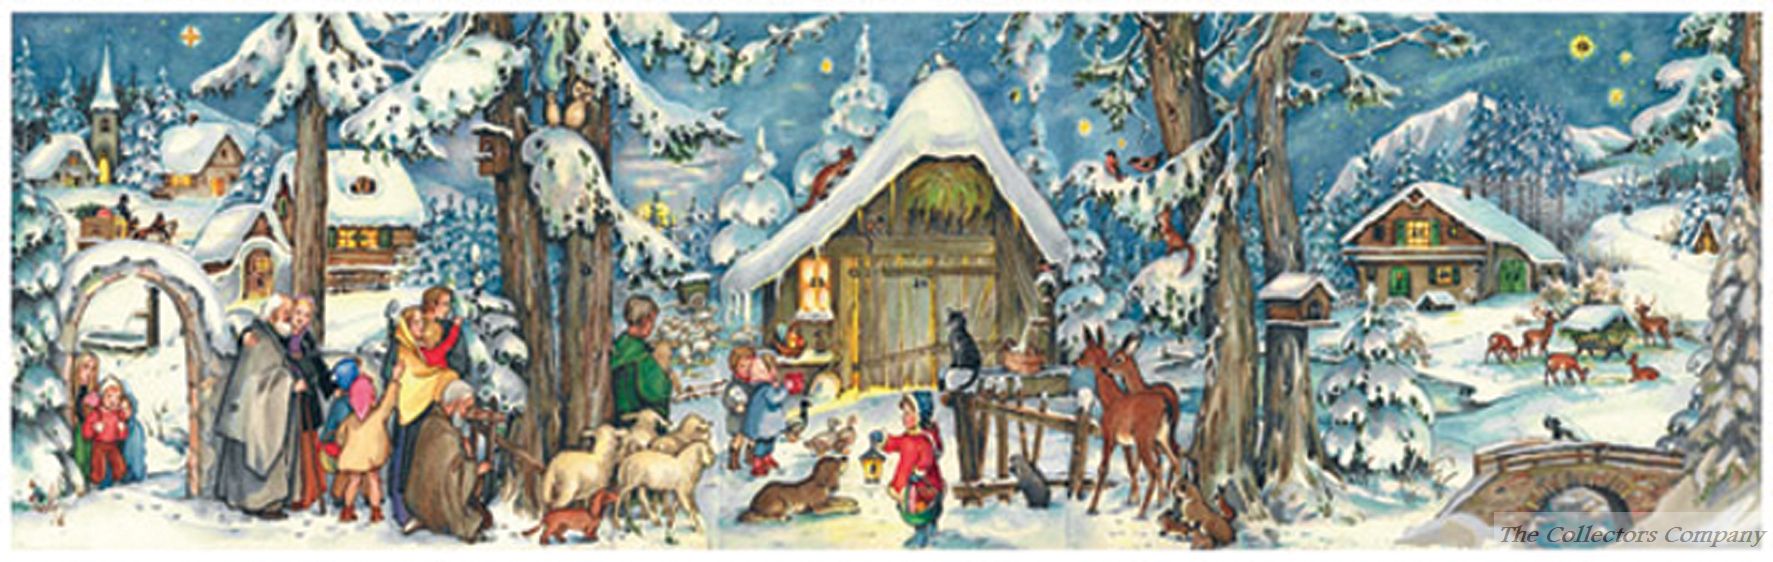 Richard Sellmer Panoramic Traditional Advent Calendar Christmas with the Animals 205 